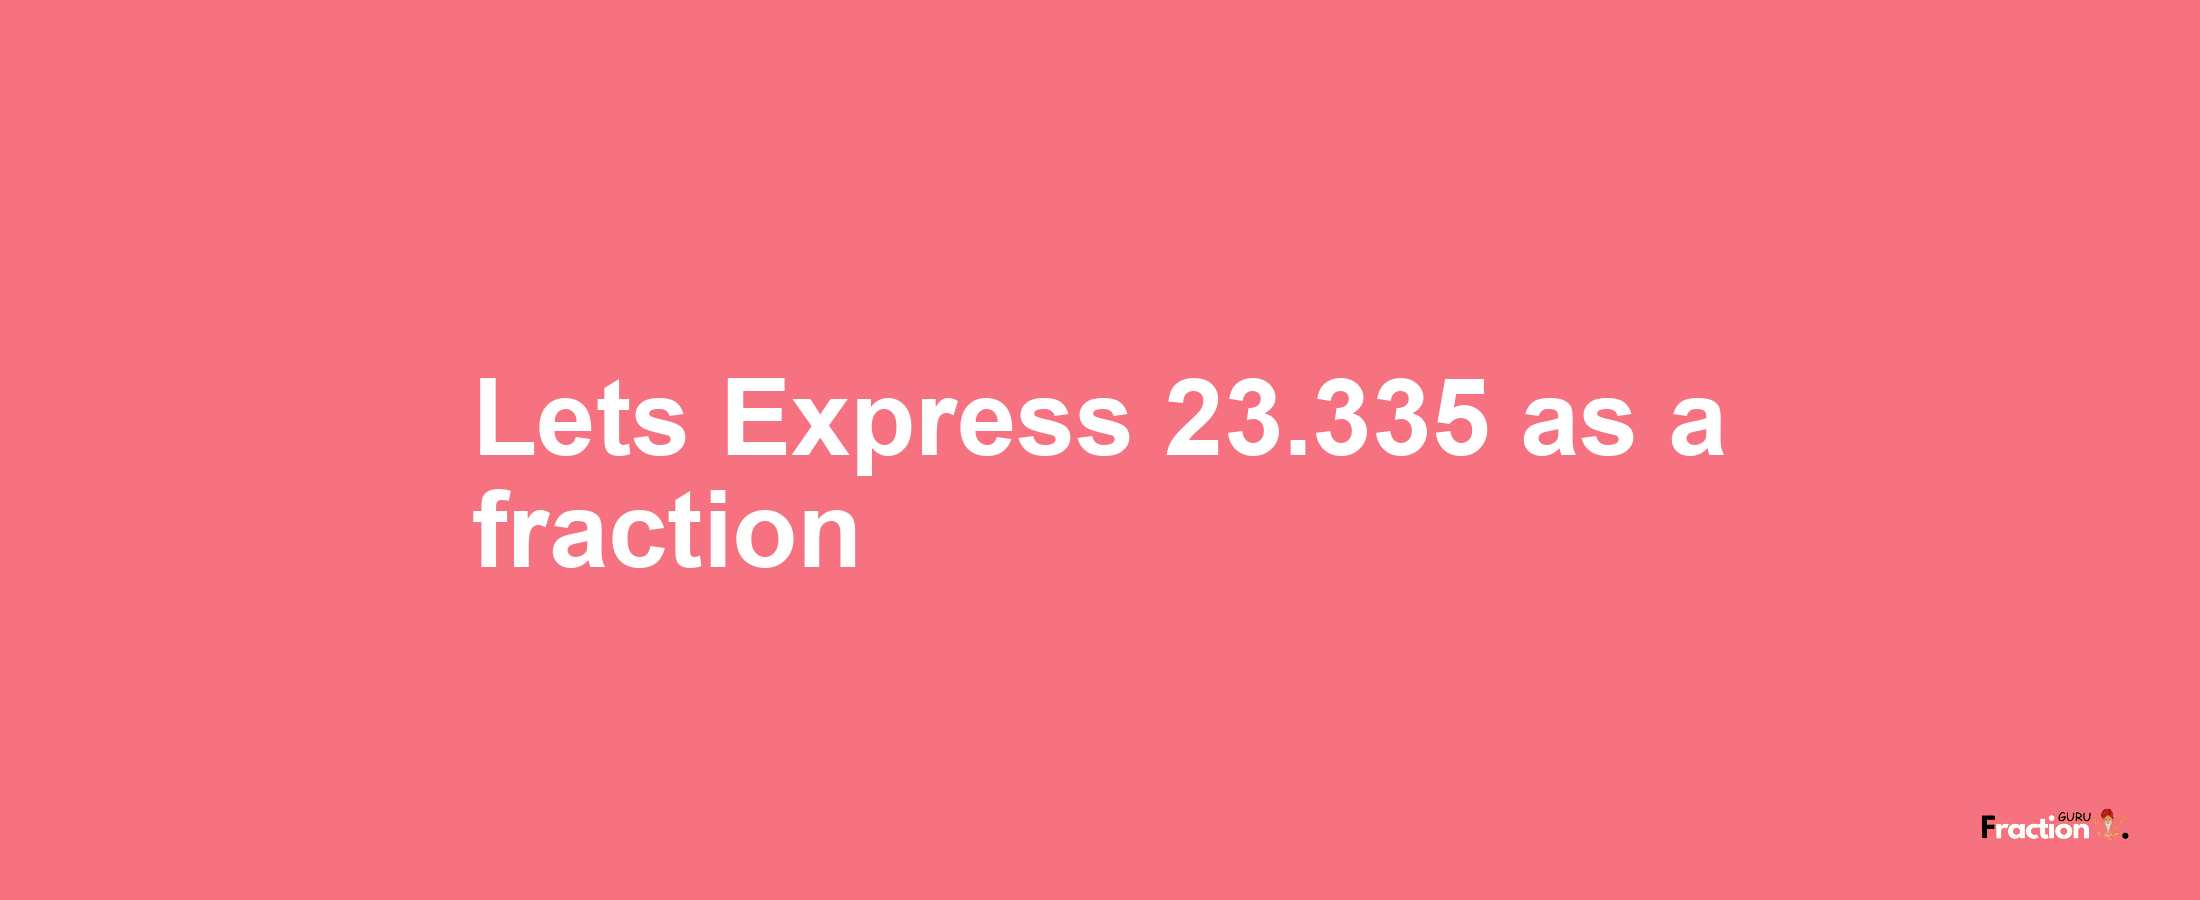 Lets Express 23.335 as afraction